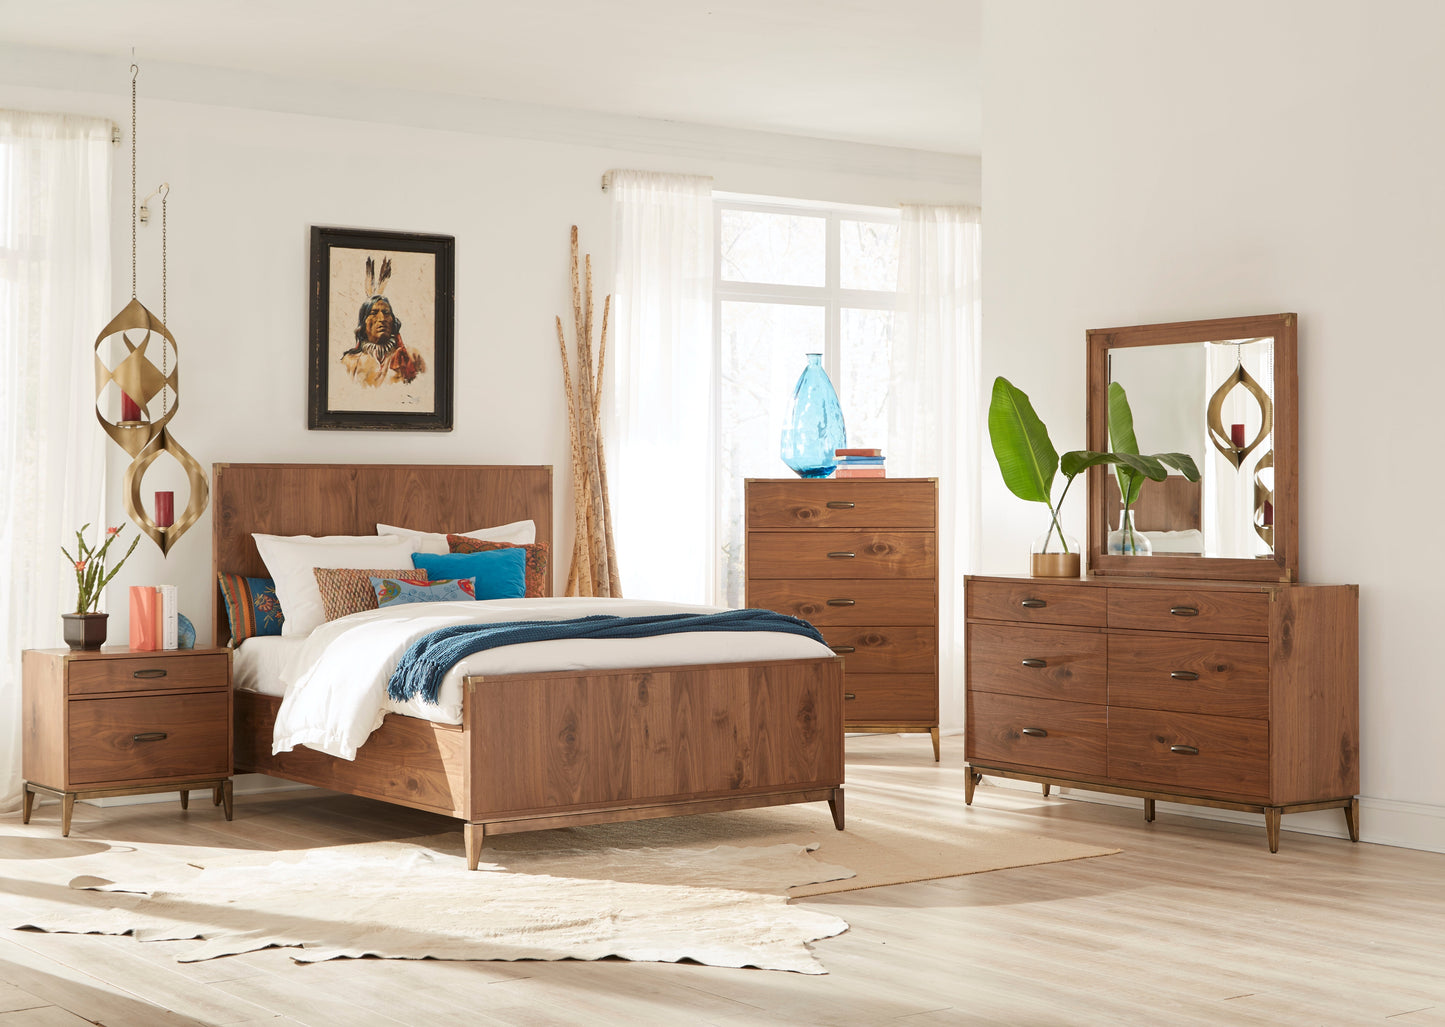 Modus Adler 5PC Queen Bedroom Set with Chest in Natural Walnut